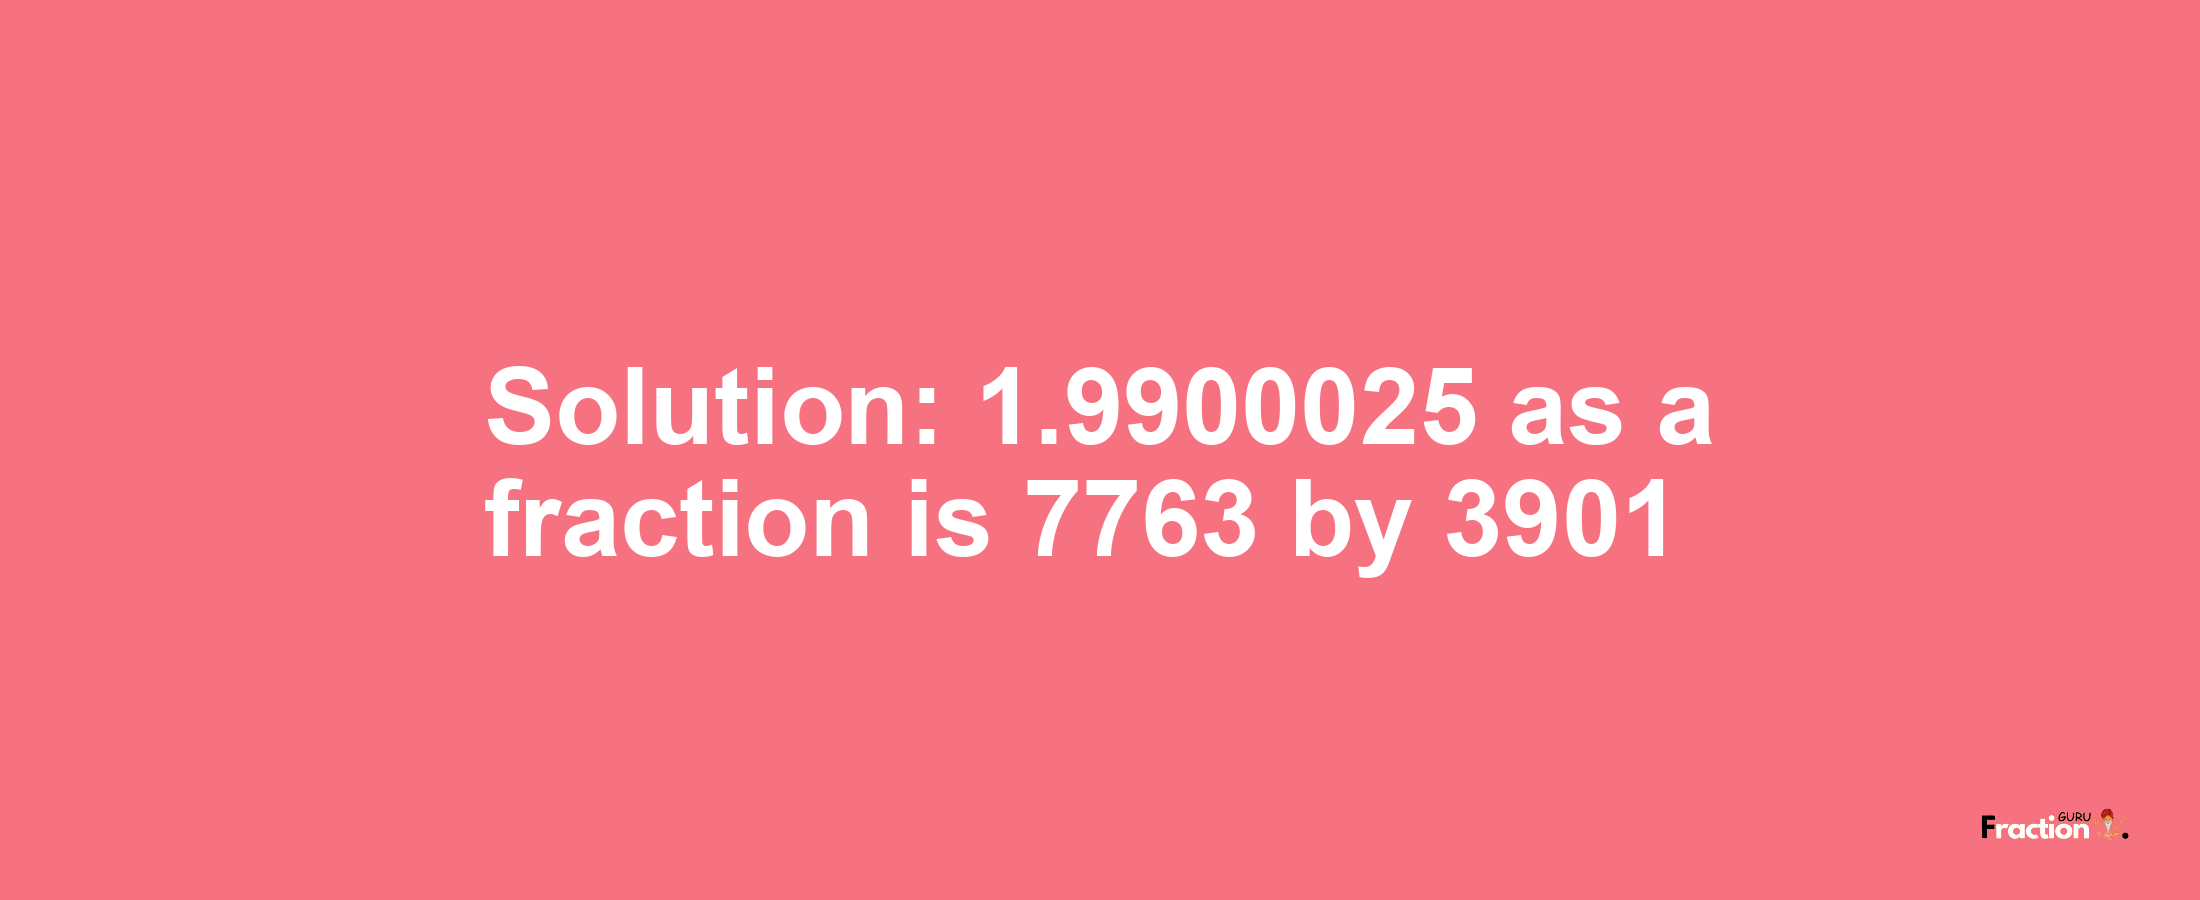 Solution:1.9900025 as a fraction is 7763/3901